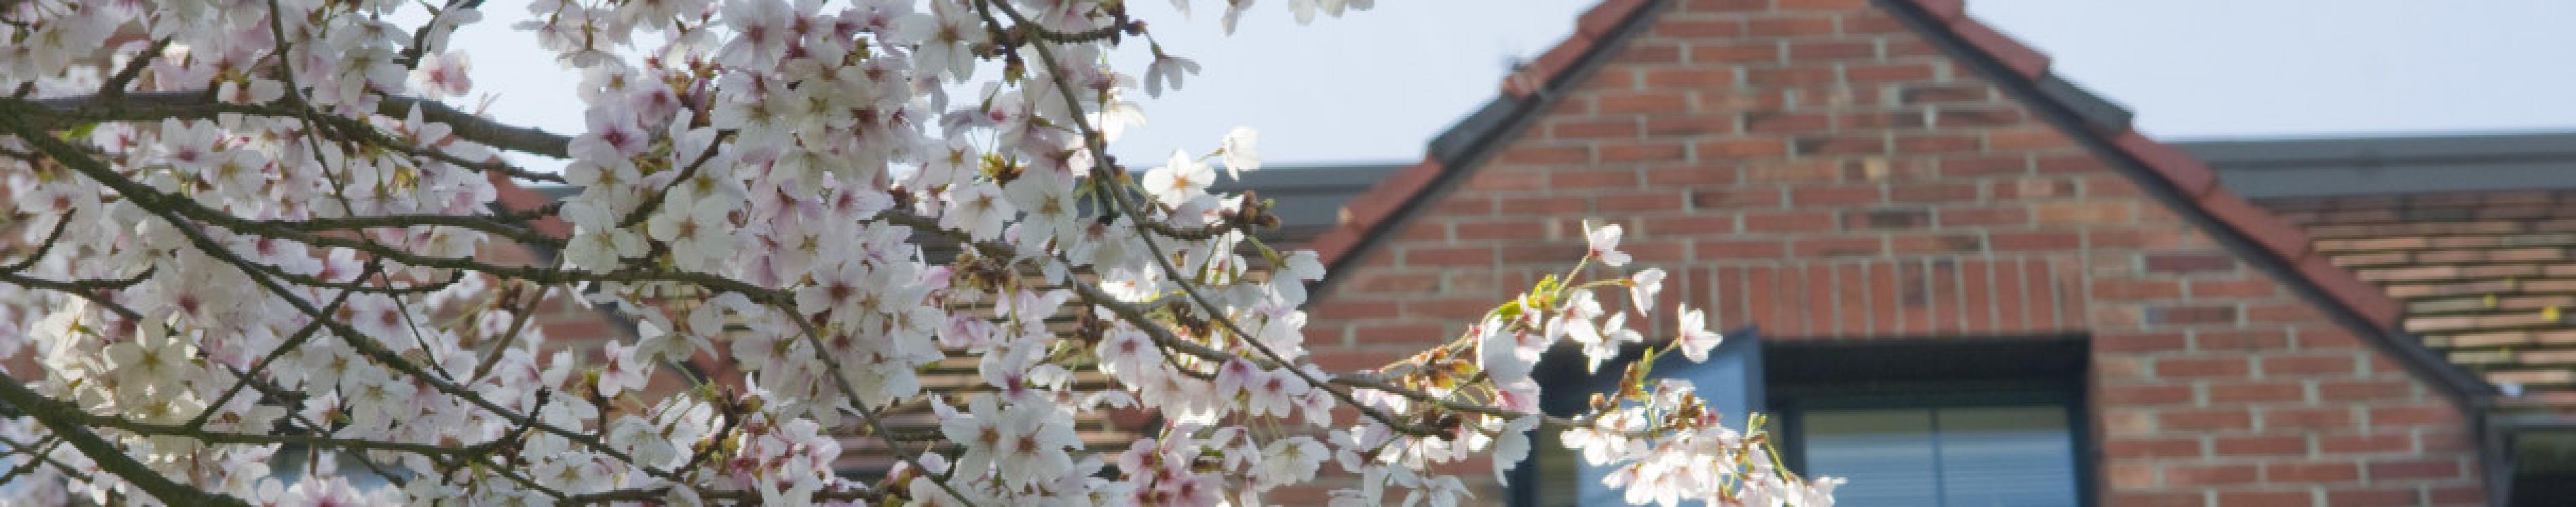 Spring blossoms with brick building roofline